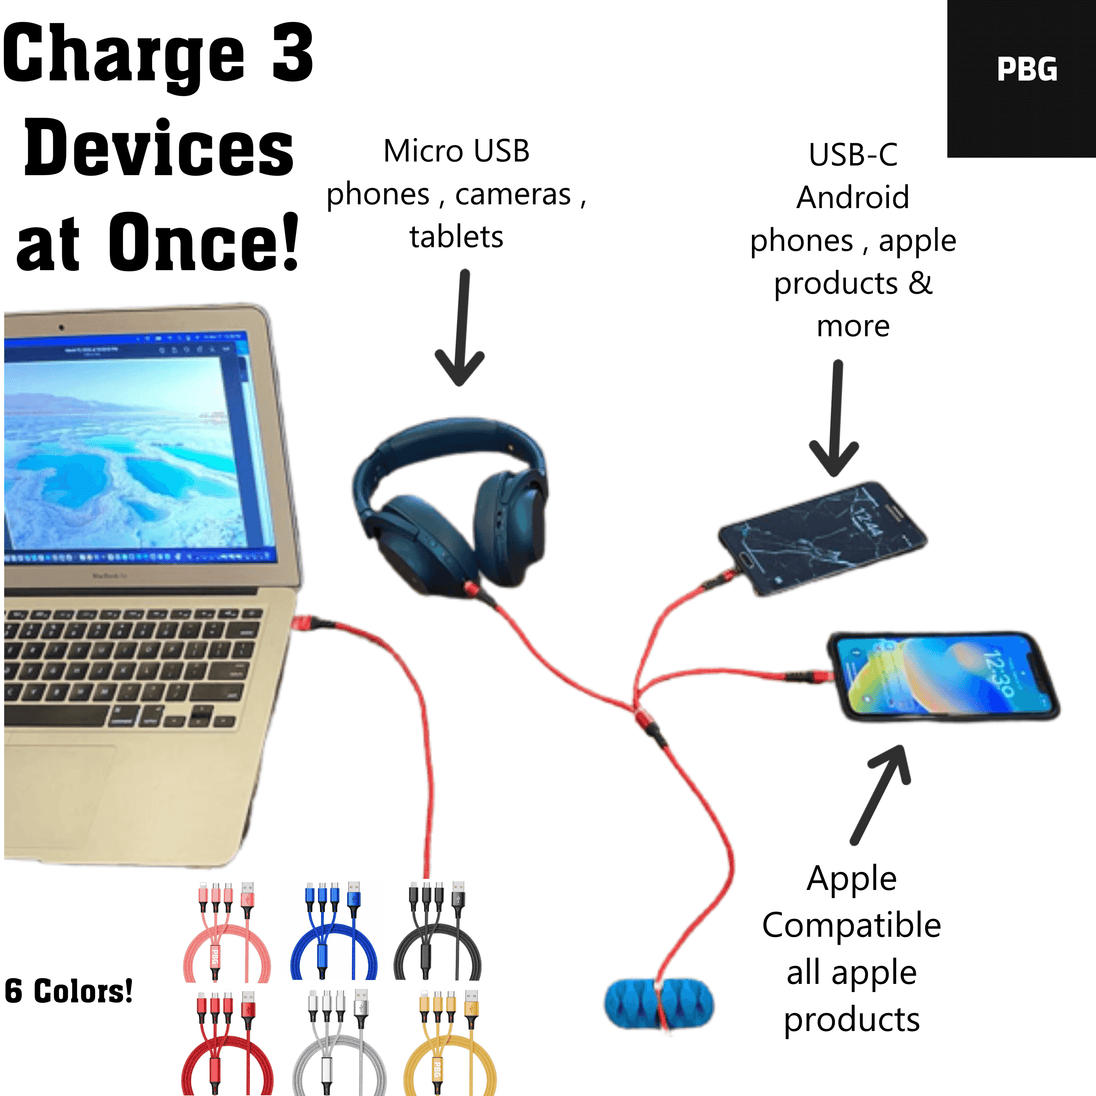 Cable for Phones, Cameras, tablet, Android Phone, iPhone, Mac | Charging cable 3 in 1